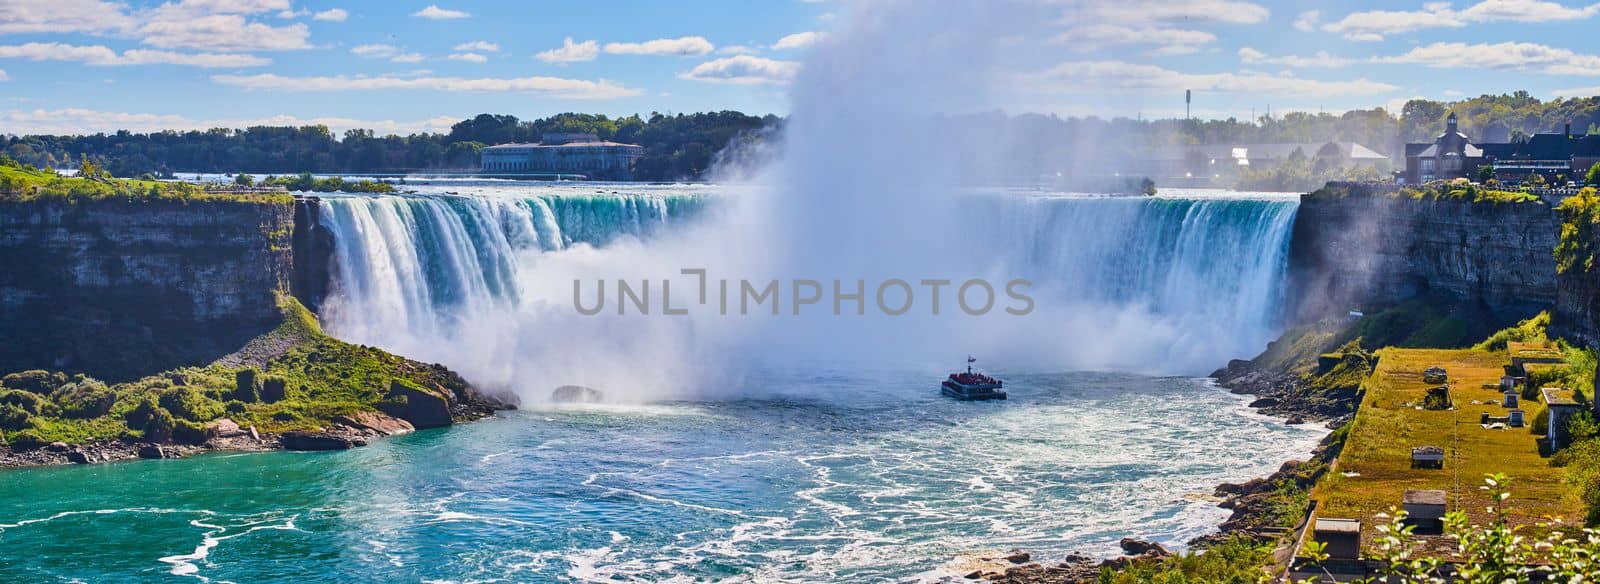 Eye level view of Niagara Falls Horseshoe Falls from Canada with mist surrounded tourist ship by njproductions